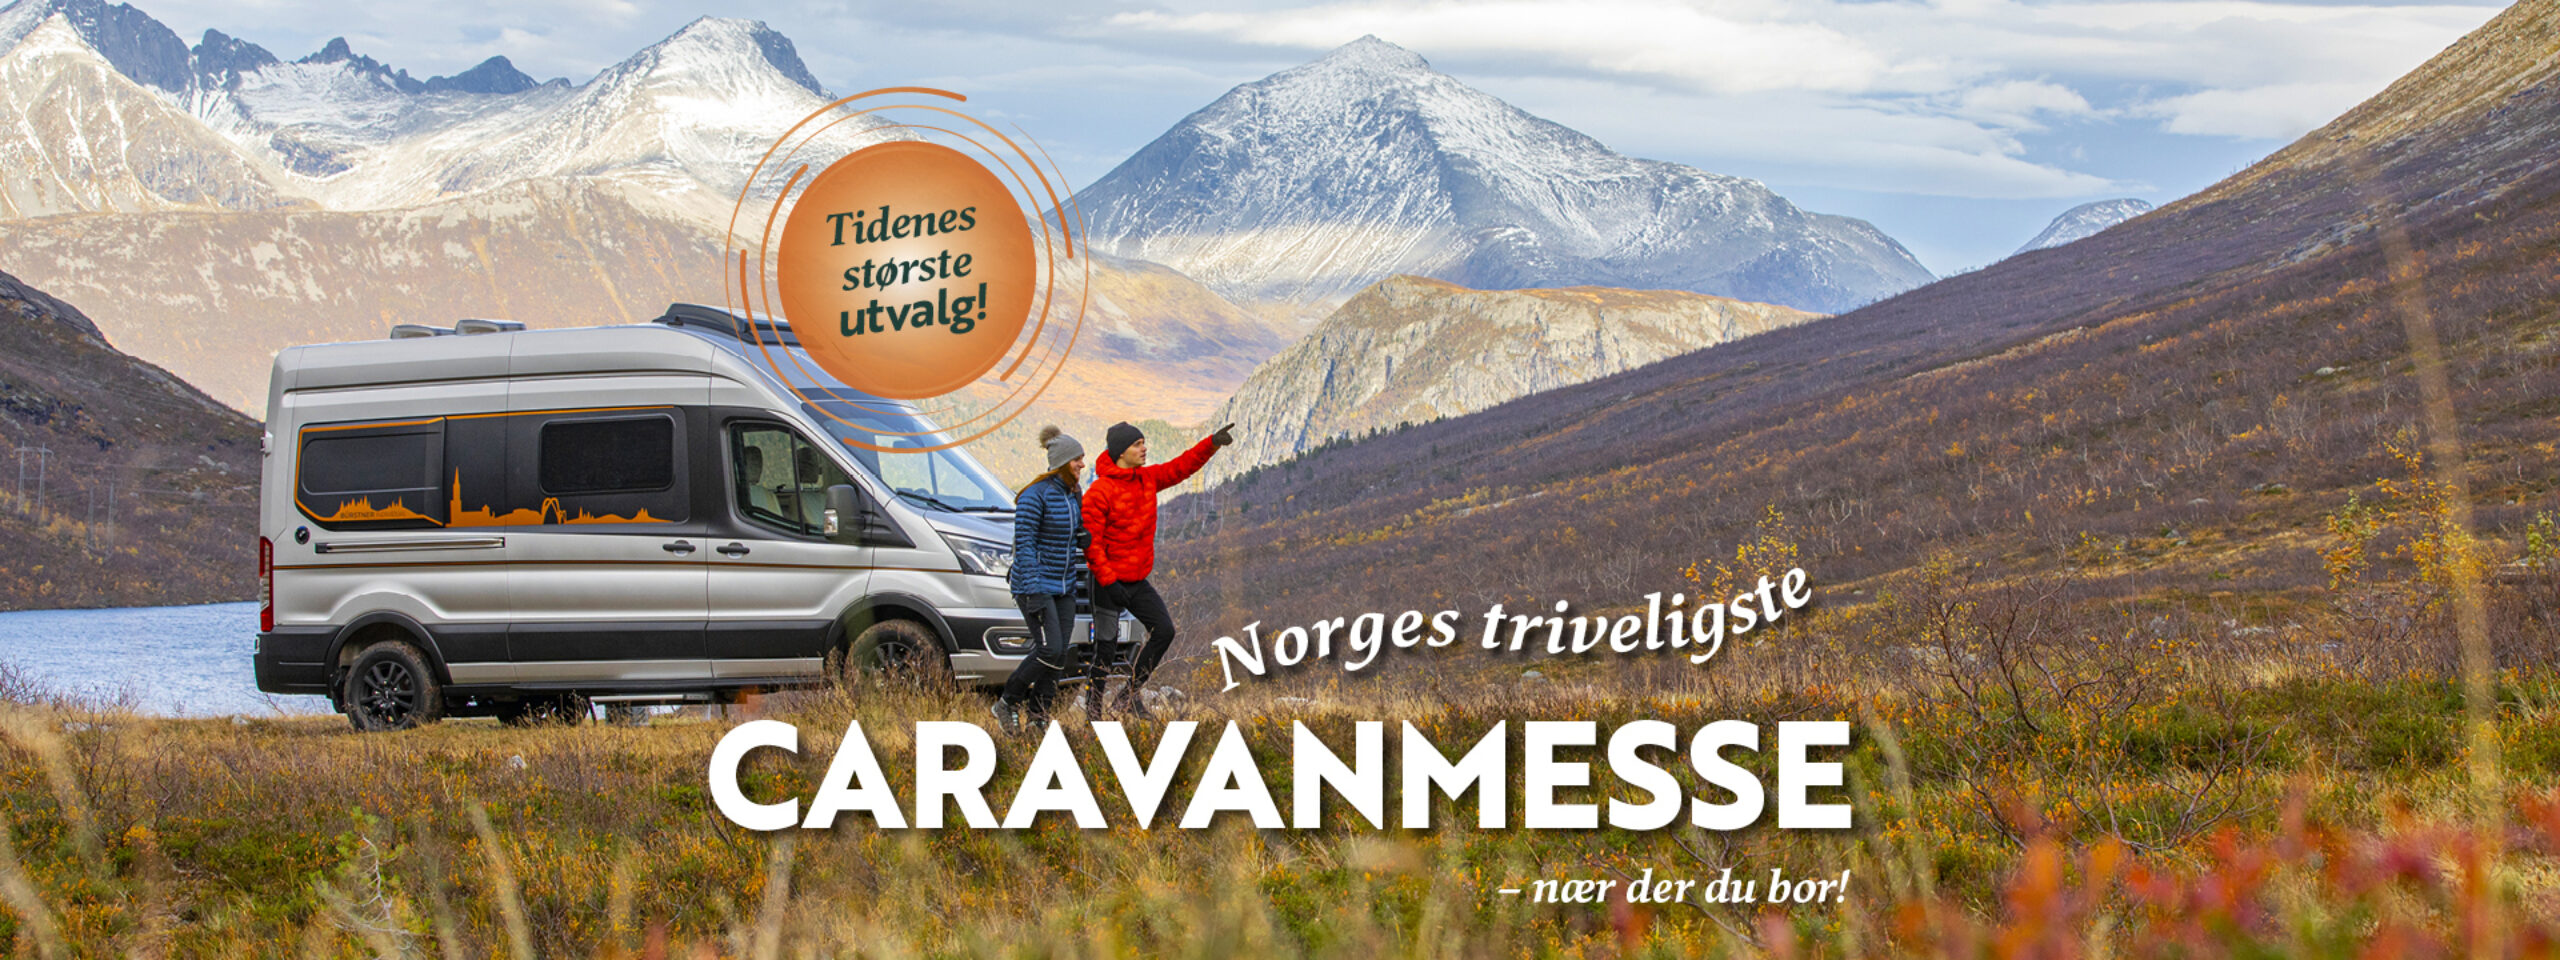 norges triveligste caravanmesse